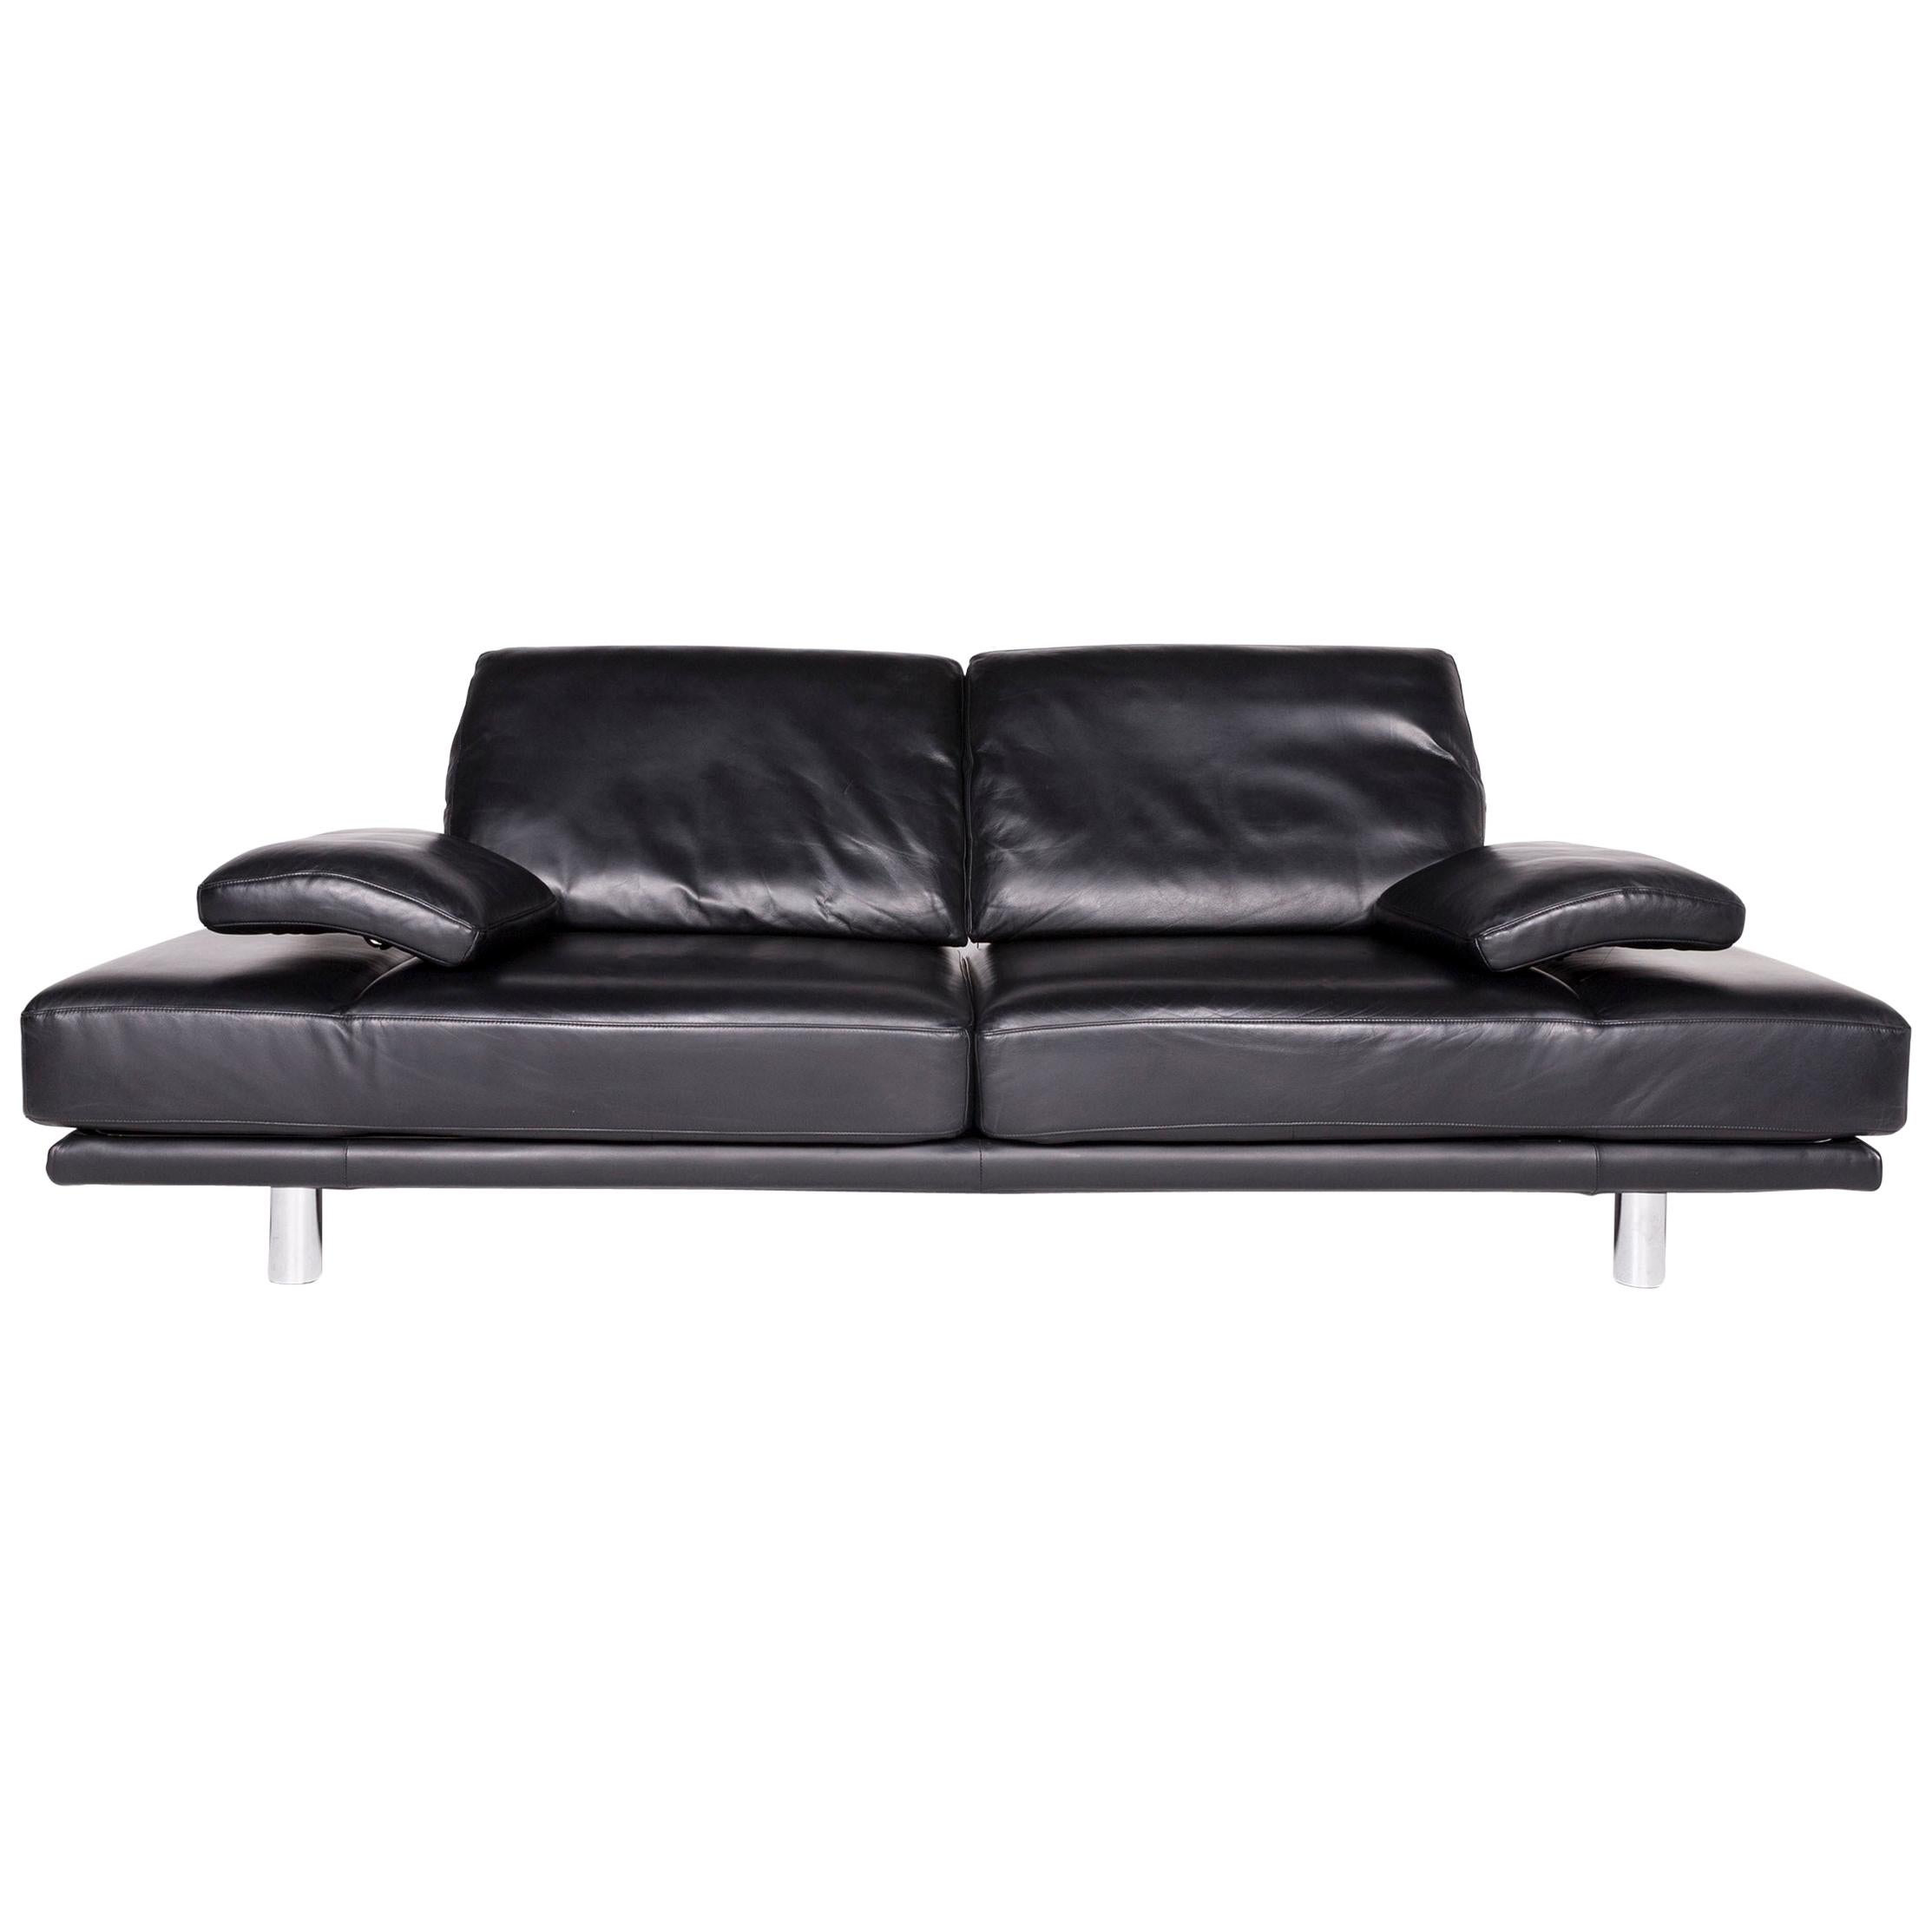 Rolf Benz 2400 Designer Leather Sofa Black Genuine Leather Three-Seat Couch For Sale